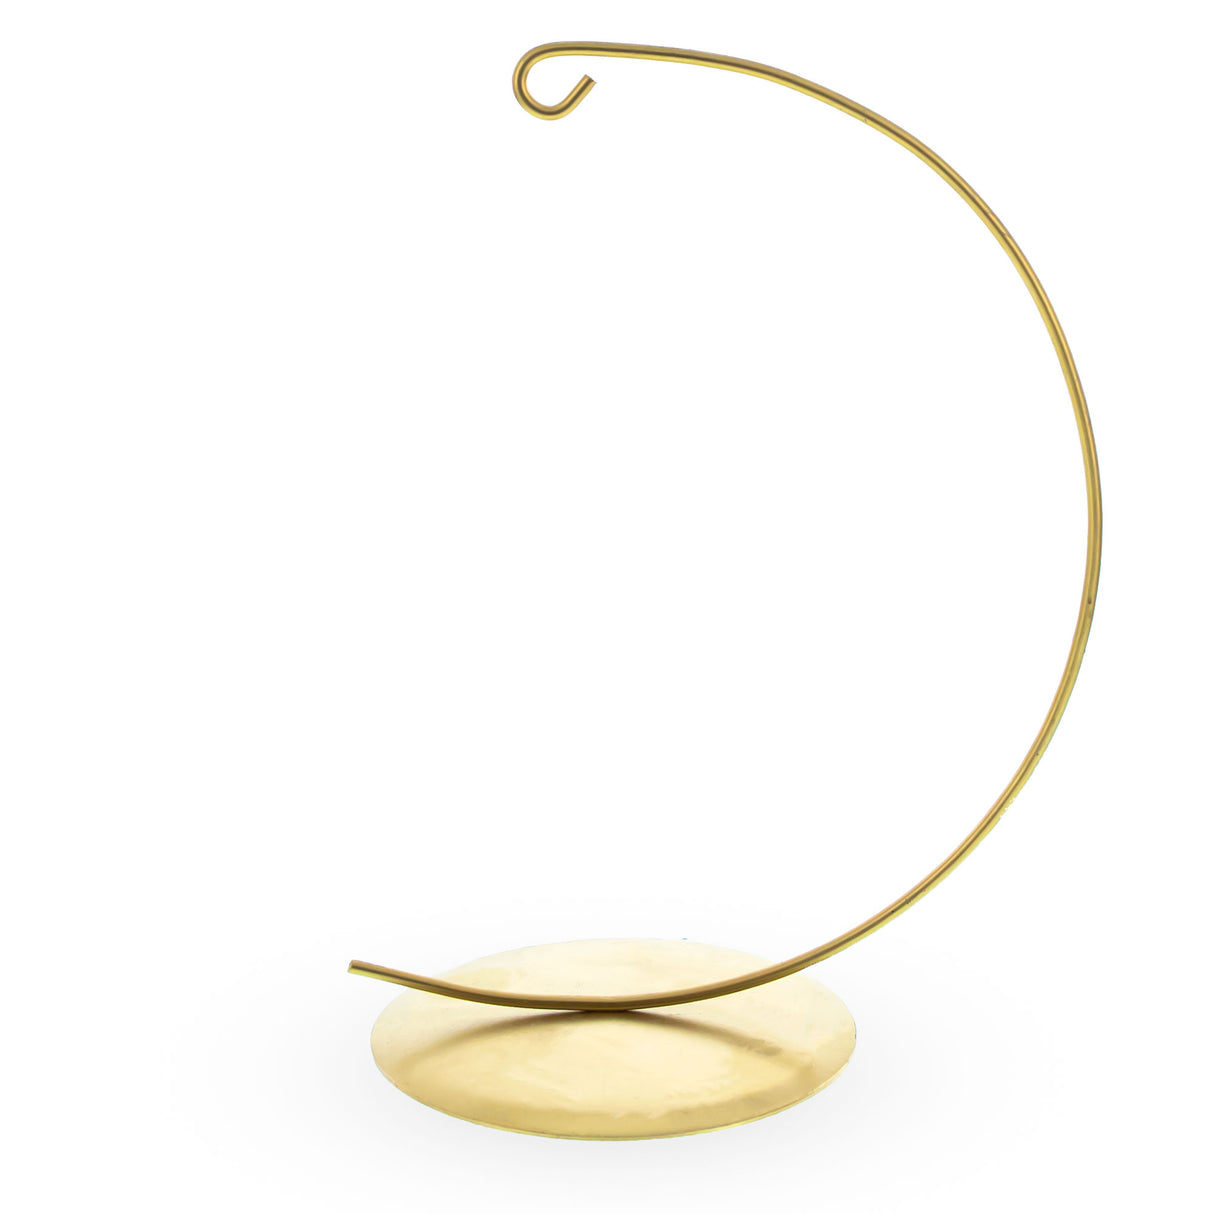 Metal Elegant Curved Gold Metal Solid Round Base Ornament Display Stand 5.9 Inches in Gold color